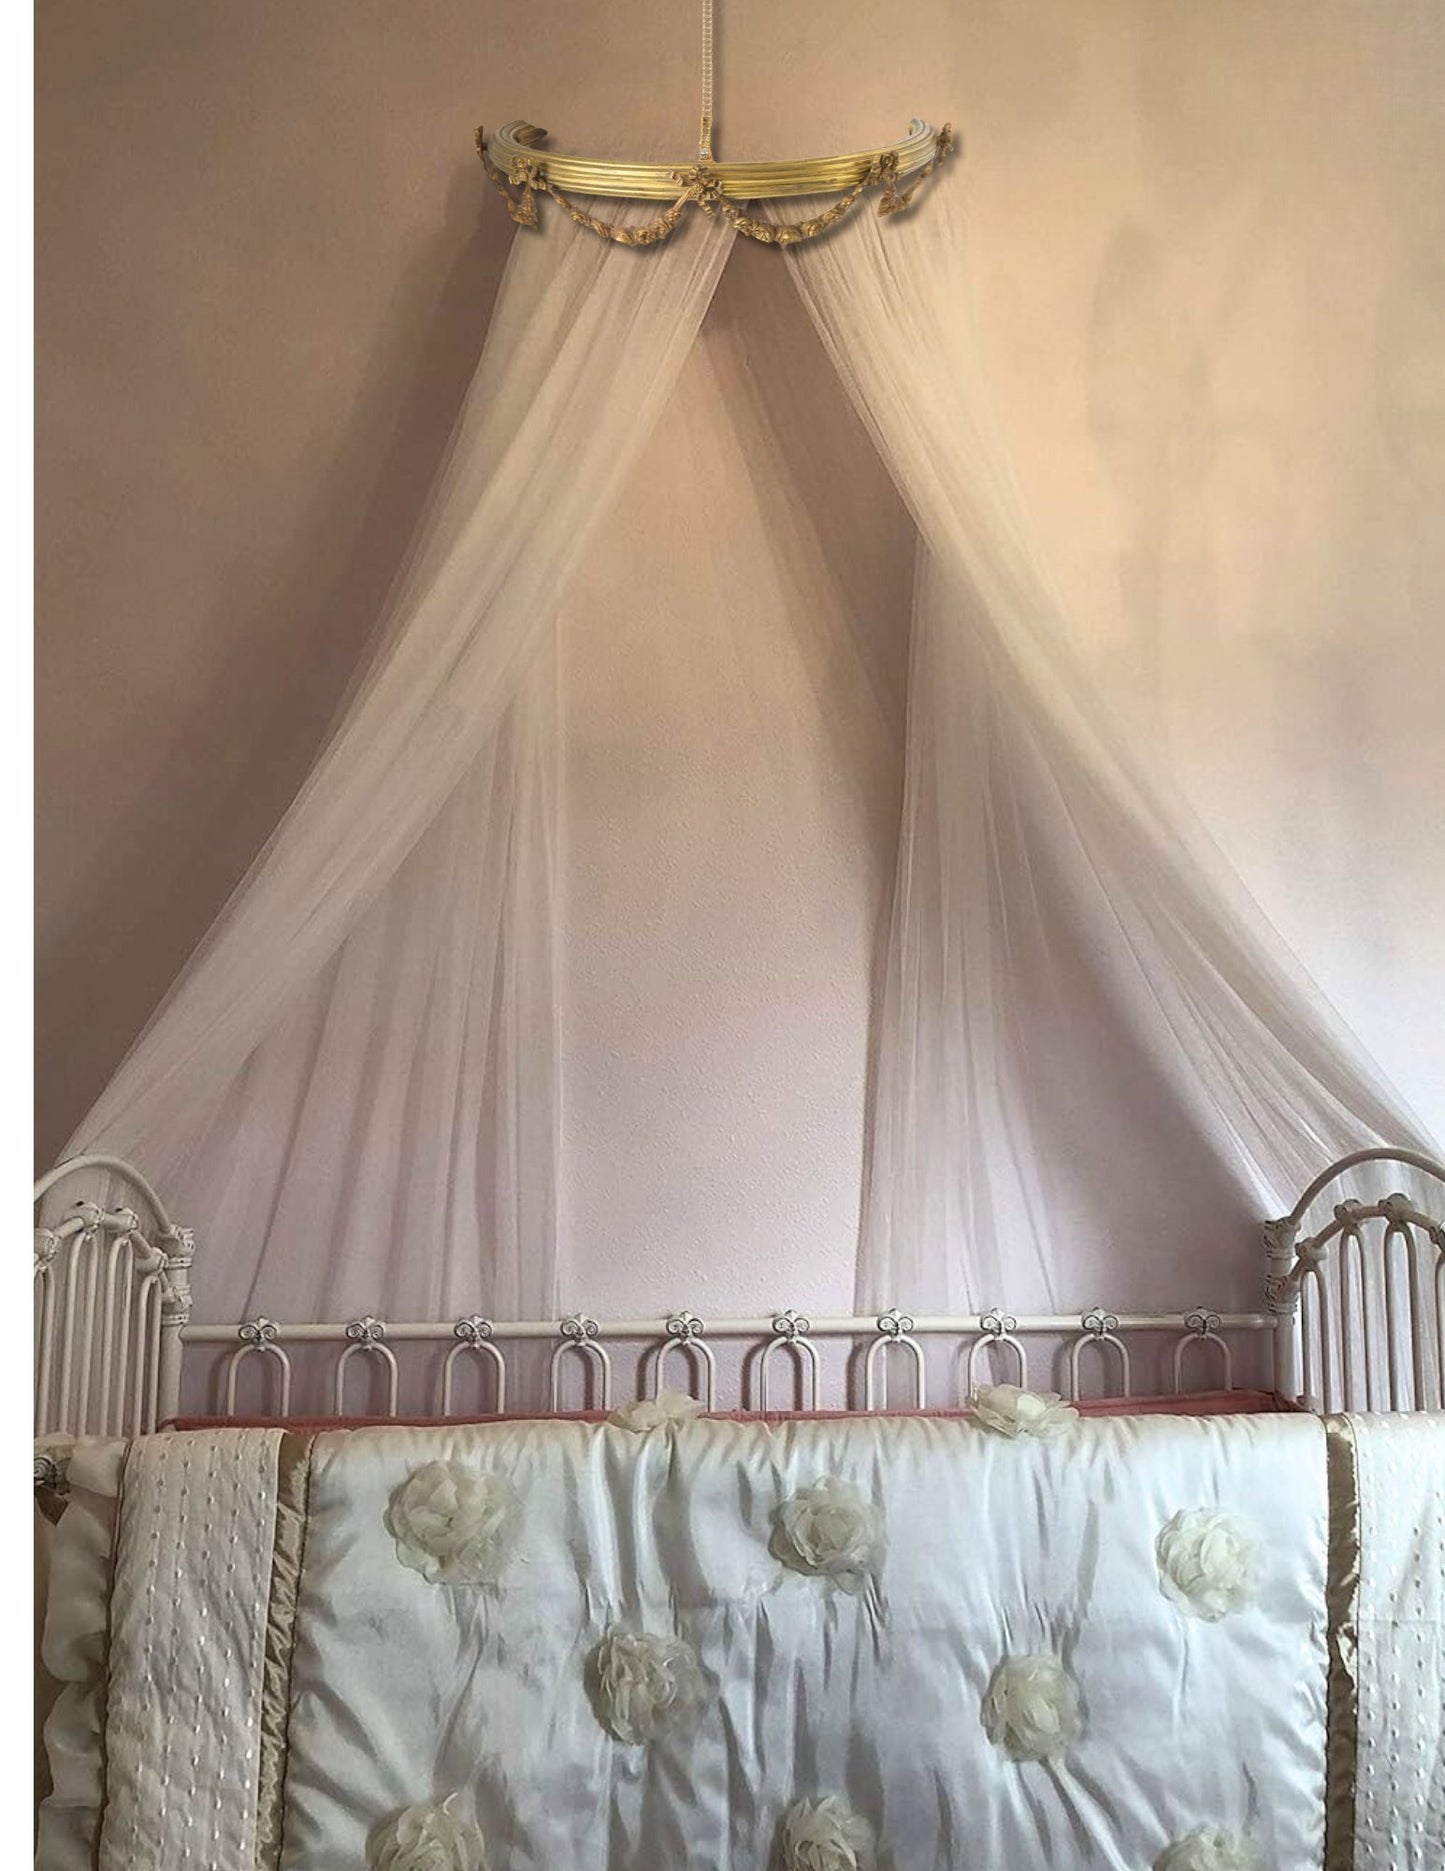 Antique French Canopy Bed Crown, Teester